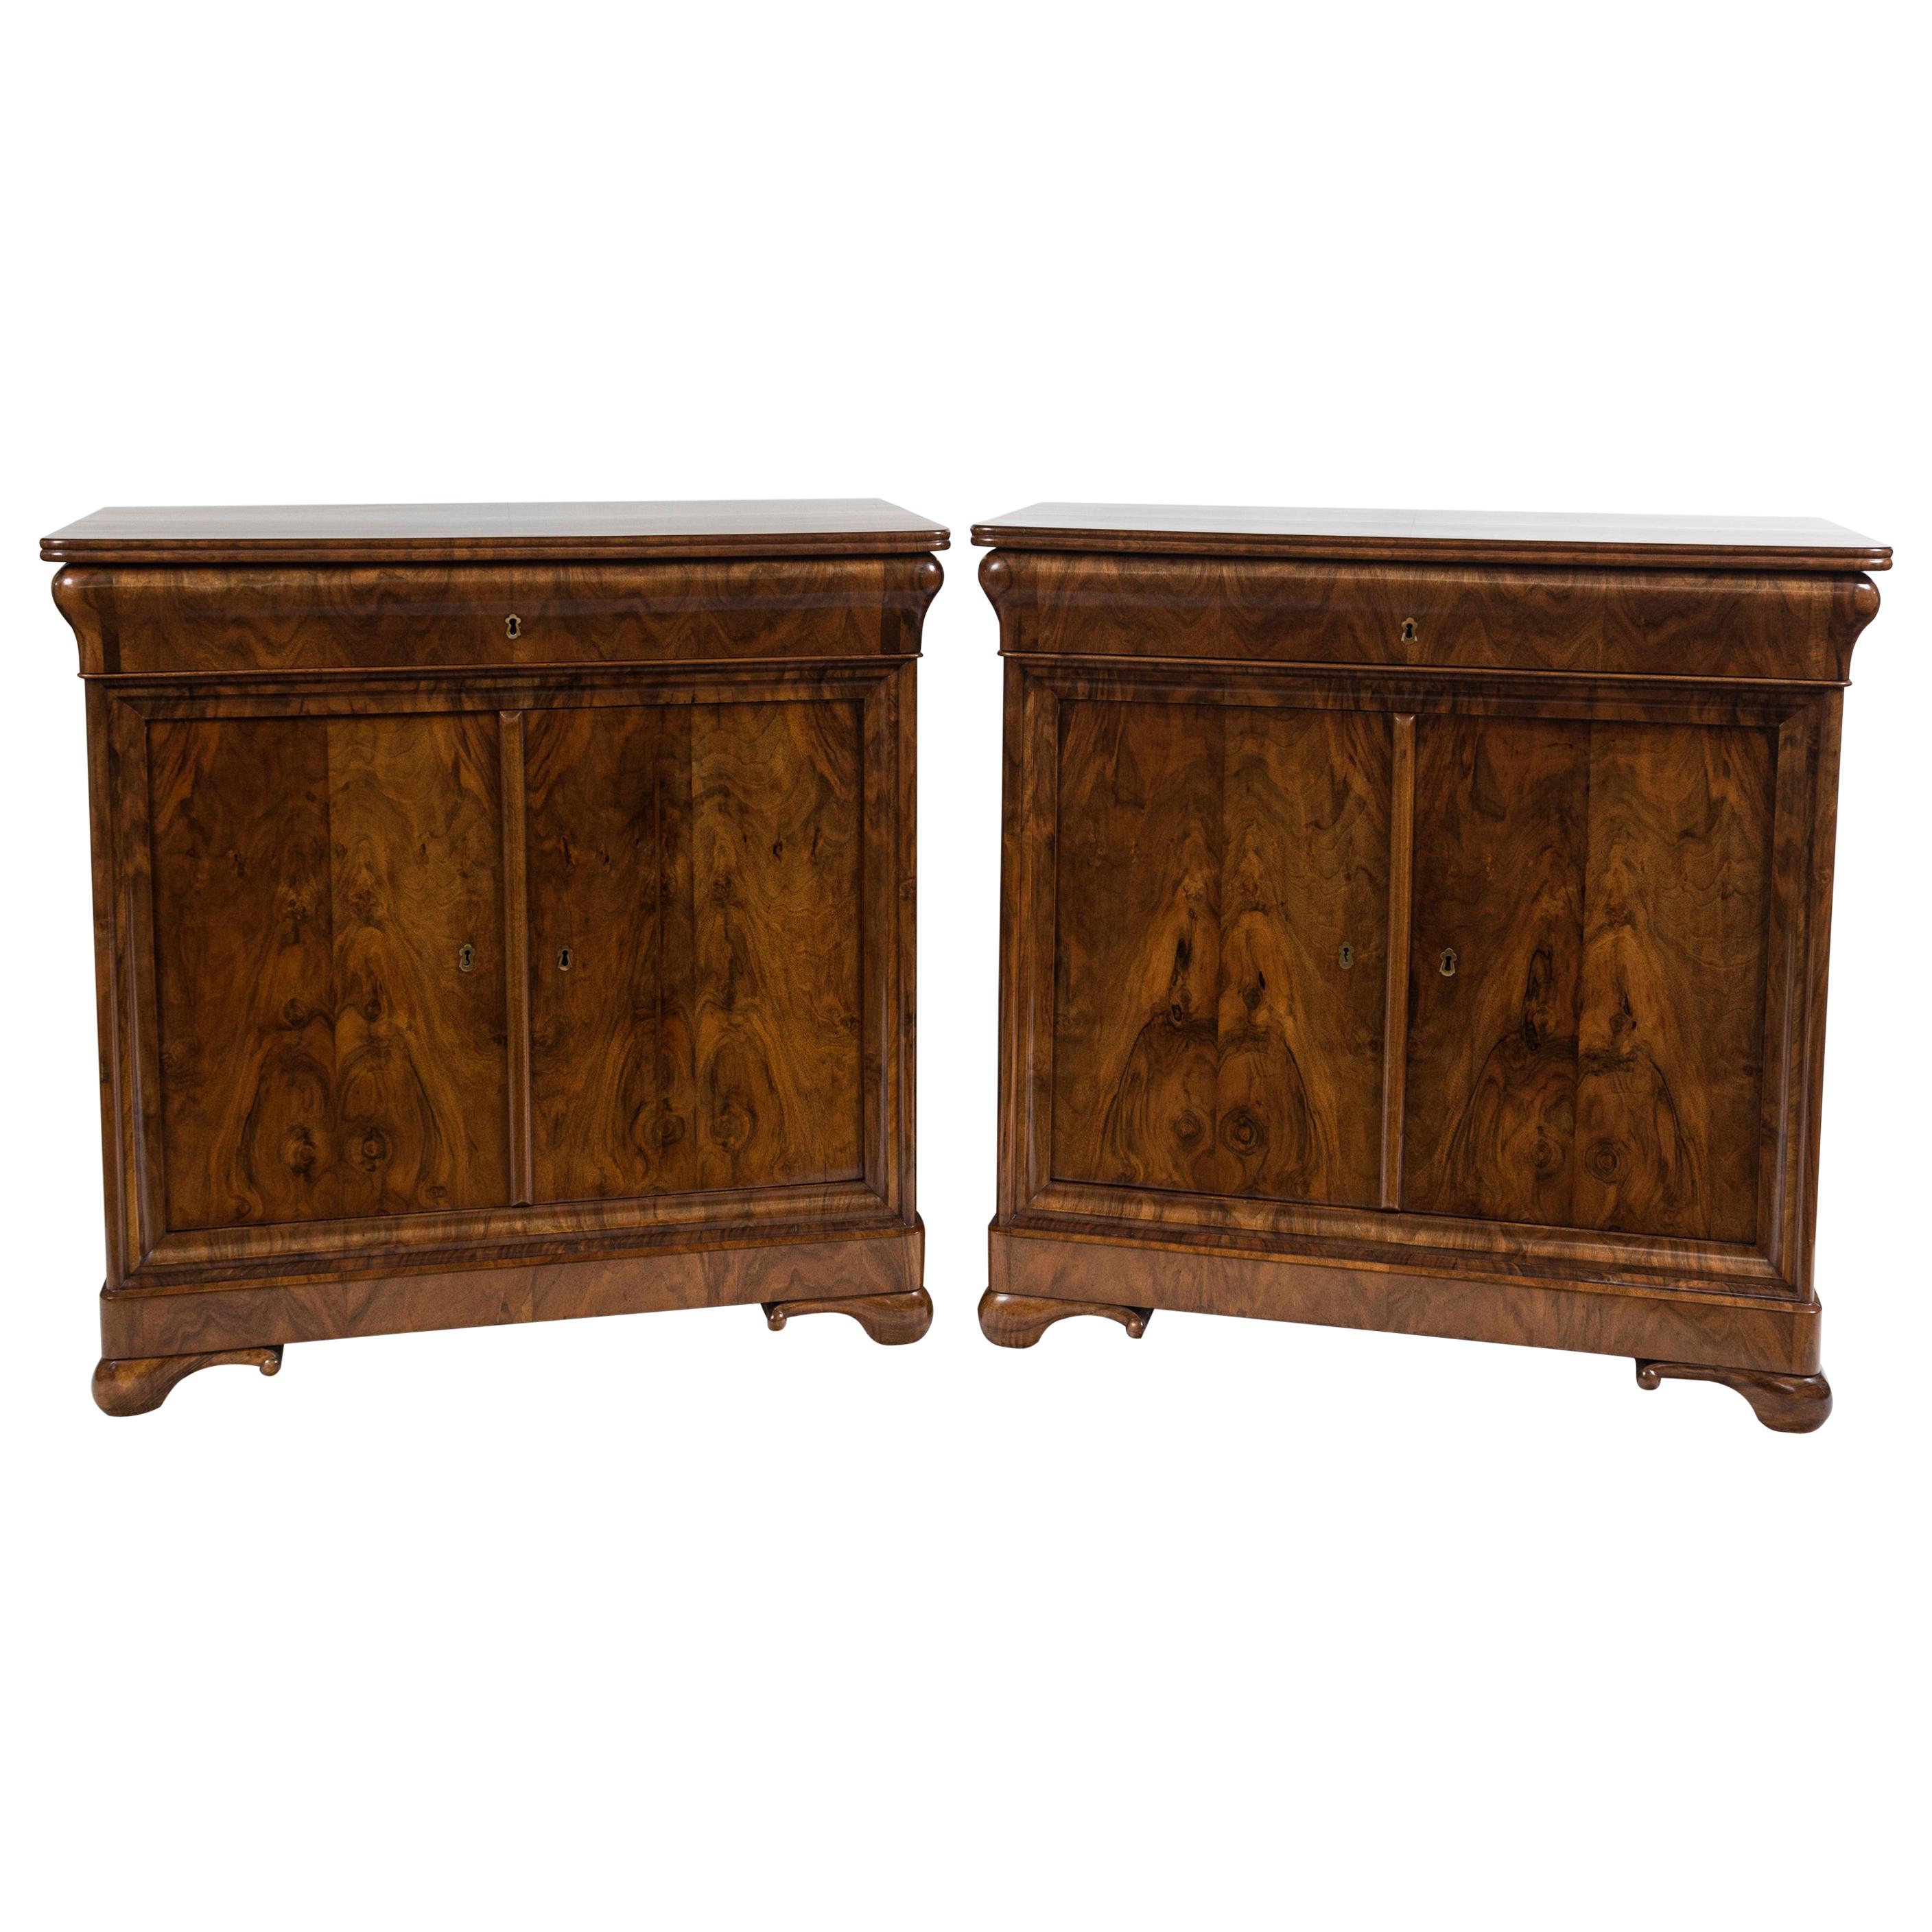 Rare Pair of Fine French Louis-Philippe Cabinets